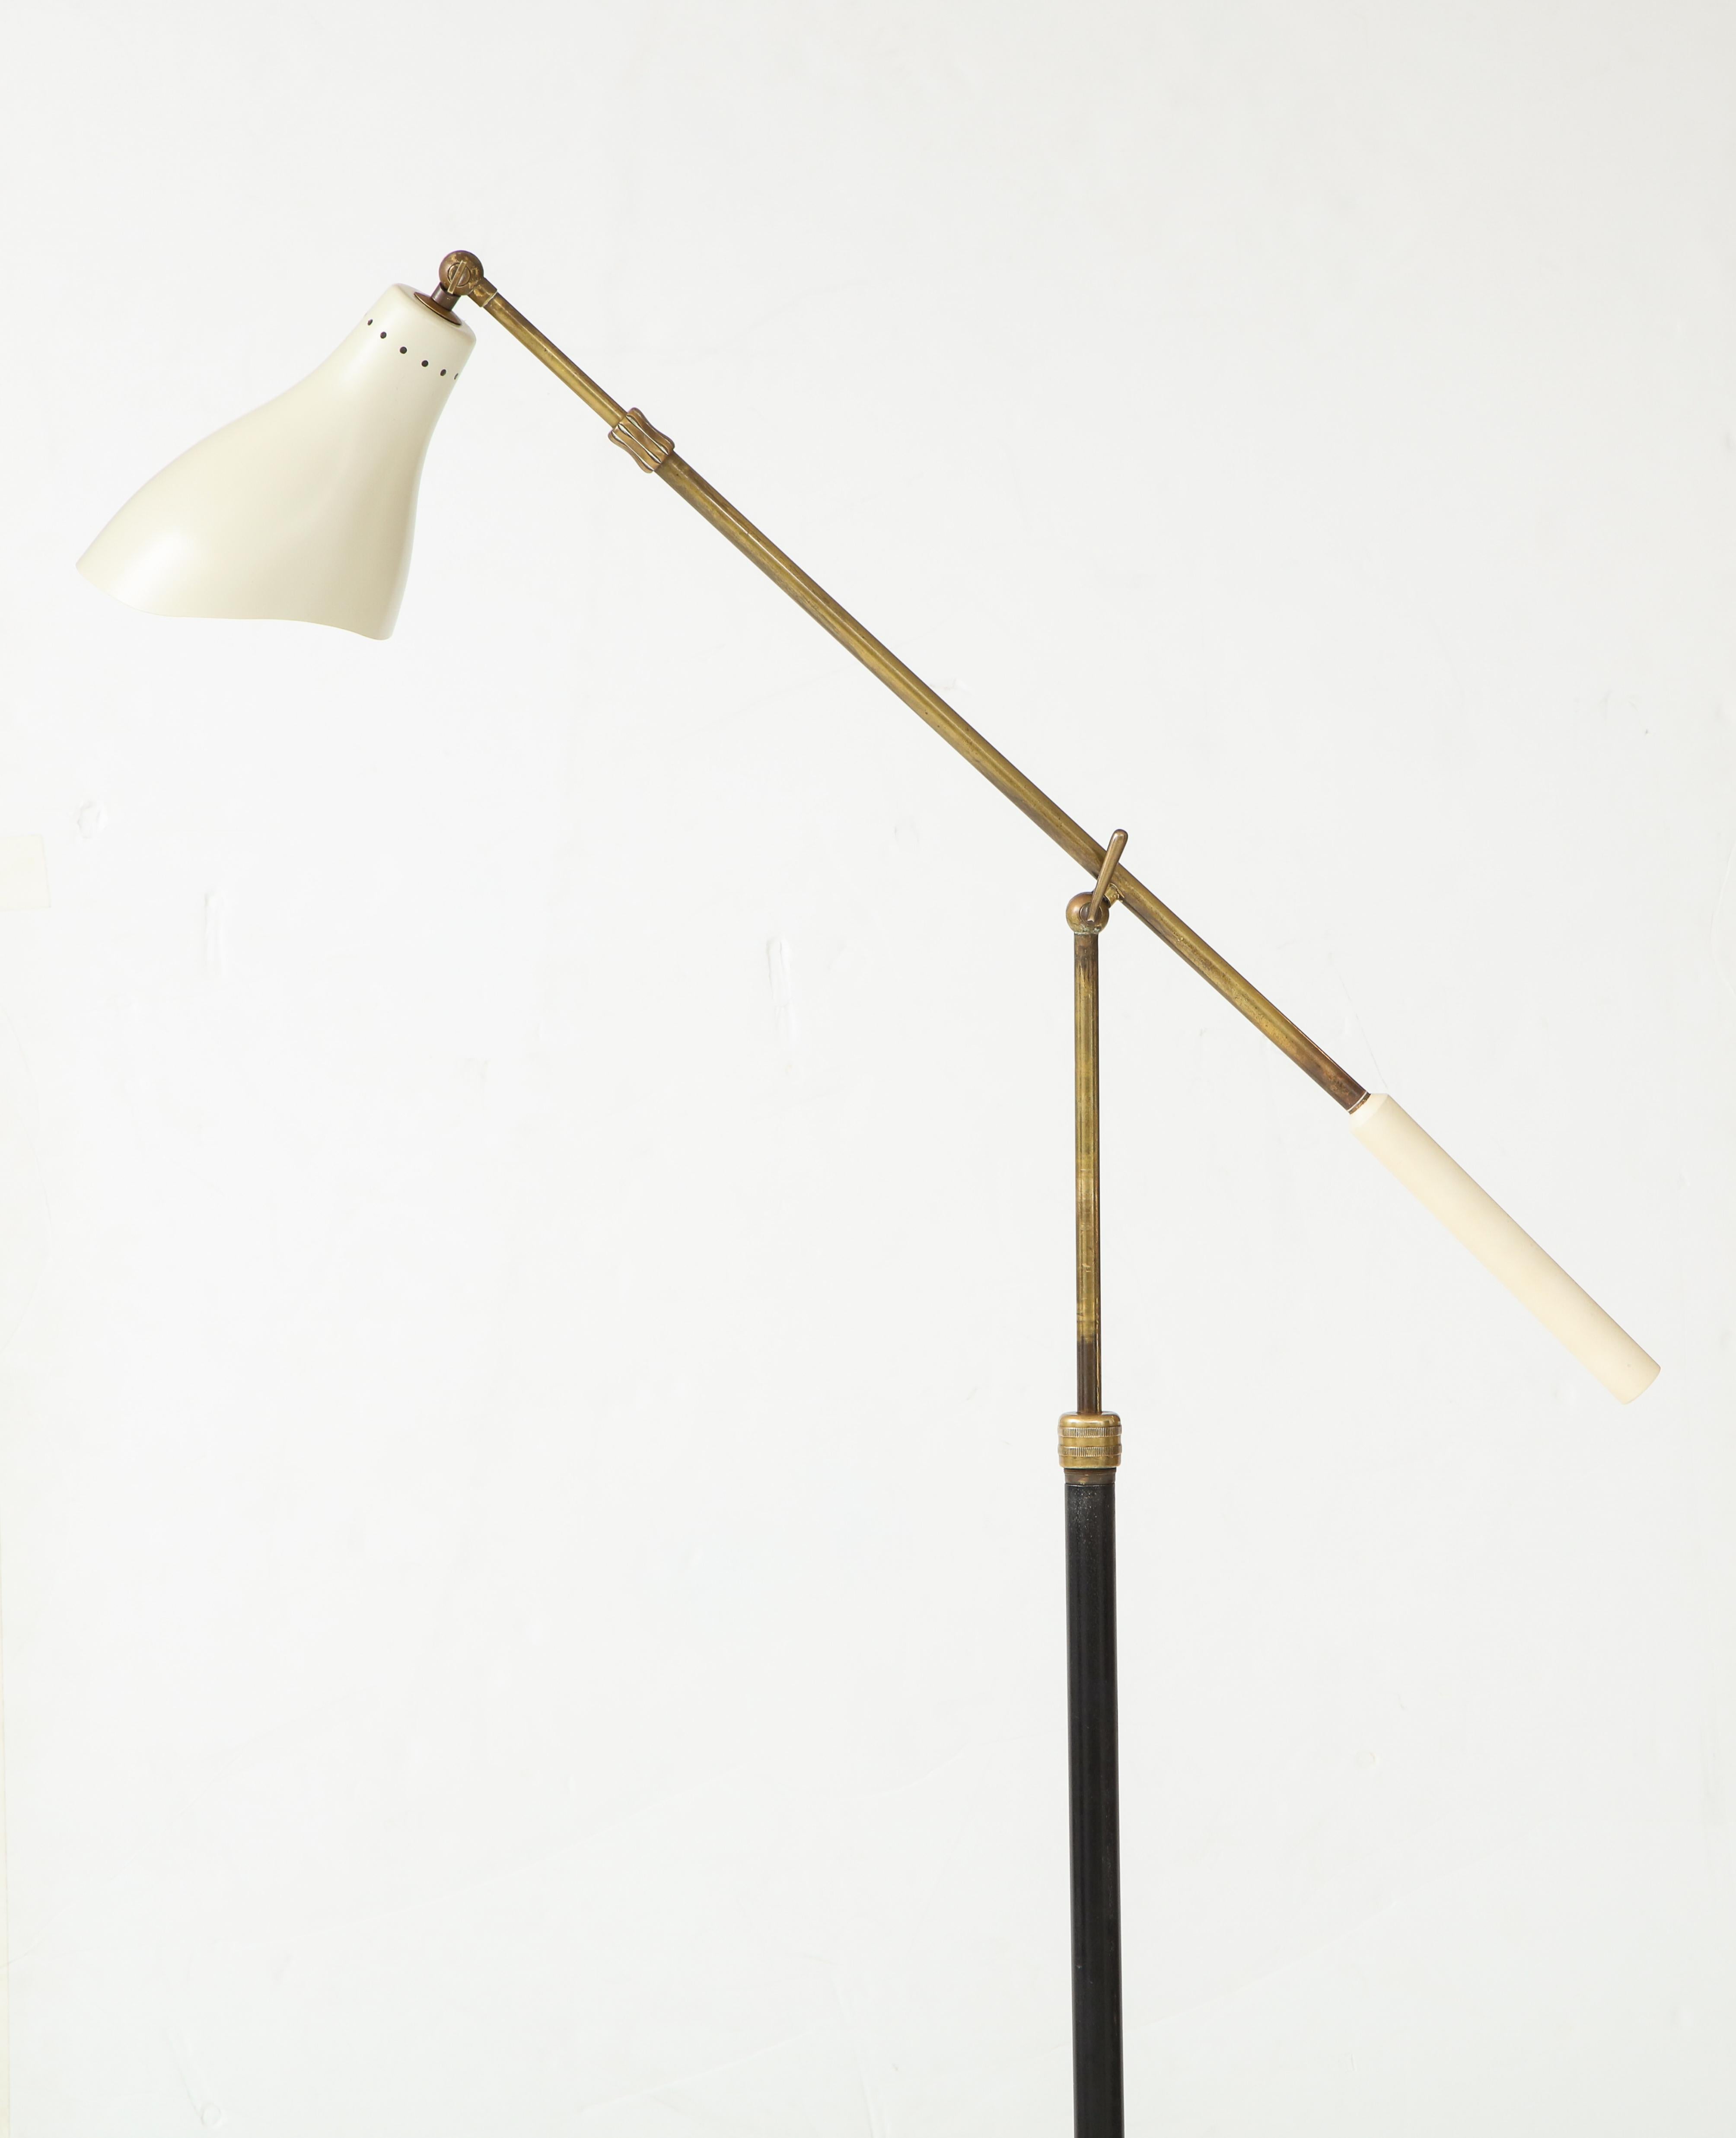 Early and rare Angelo Lelii for Arredoluce articulating floor lamp with pivoting off-white lacquer perforated aluminum shade on brass arm adjustable to various heights by way of an internal system at the central joint and controlled by the